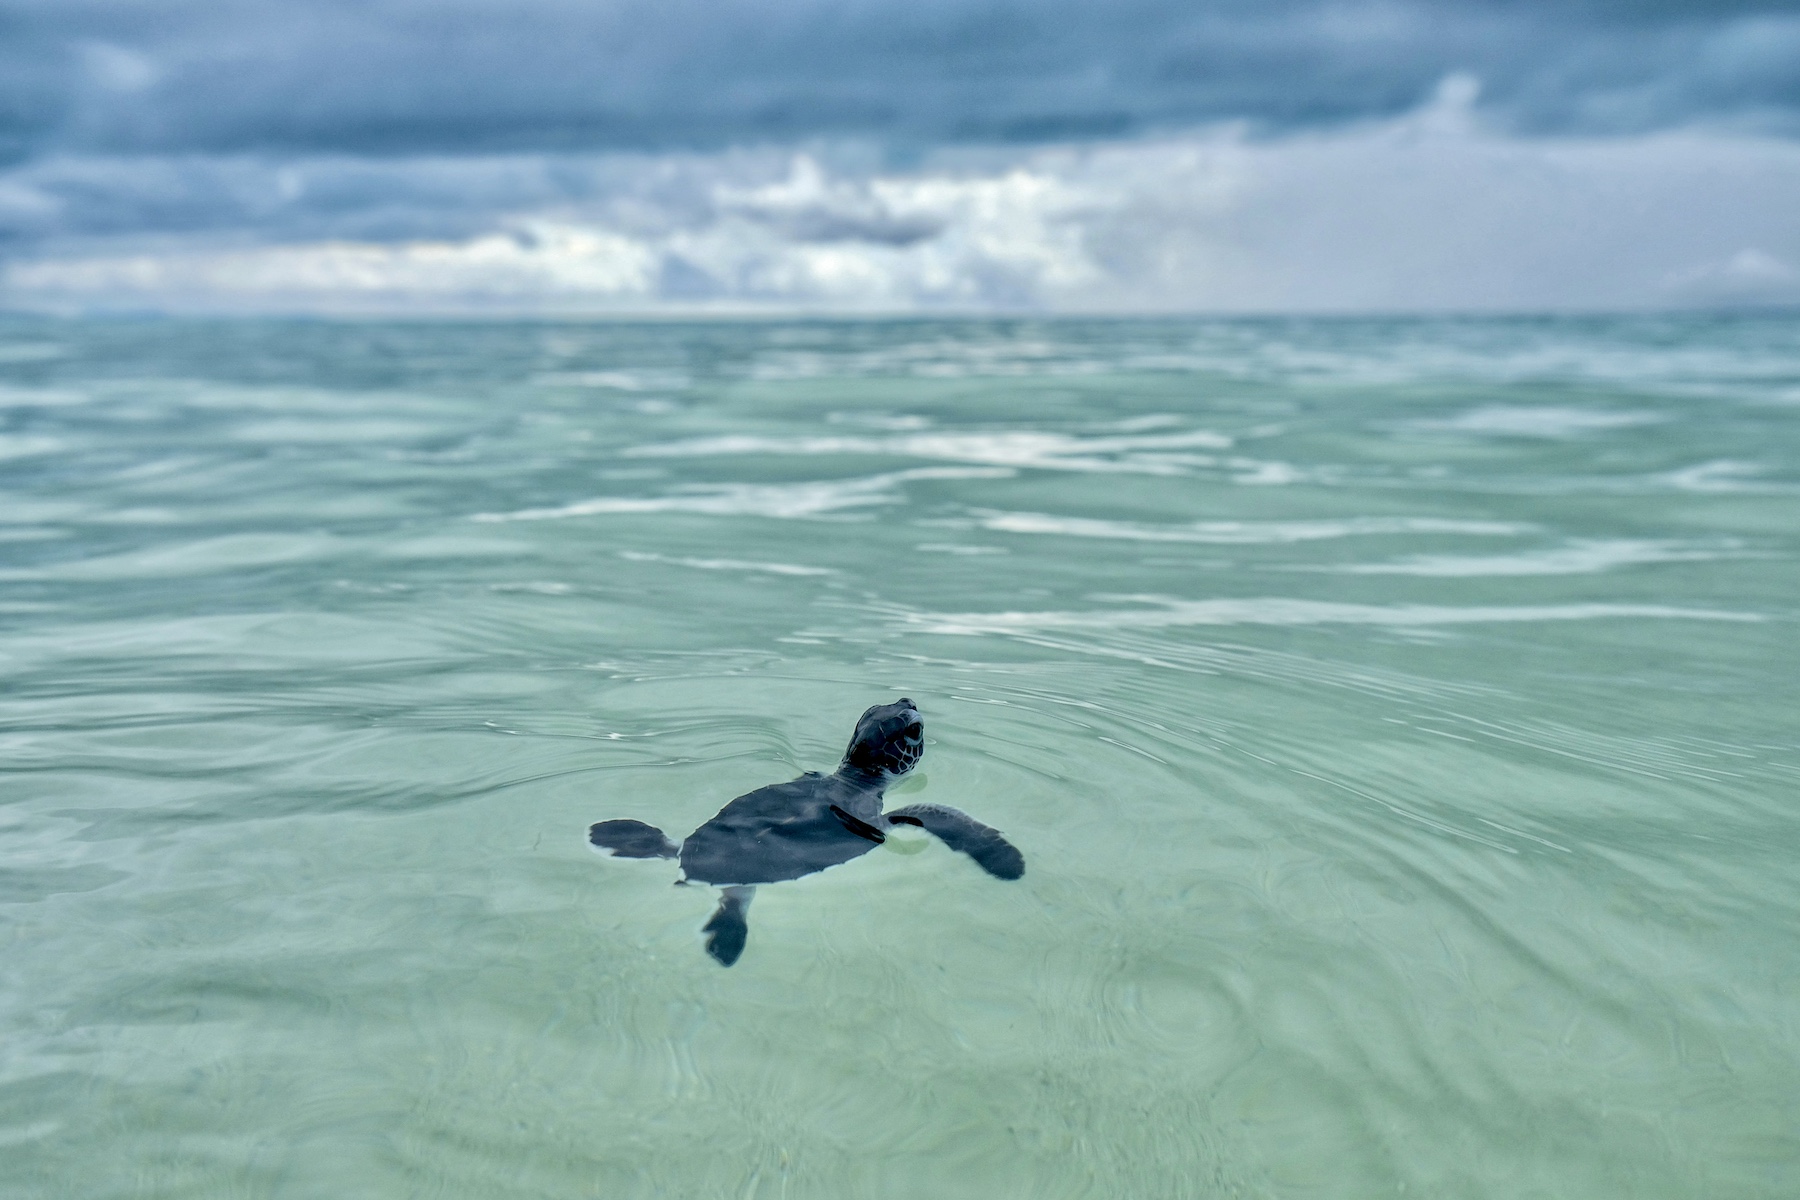 305 Baby Sea Turtles Have Been Released To Sea In Indonesia After Being Rescued From Poachers